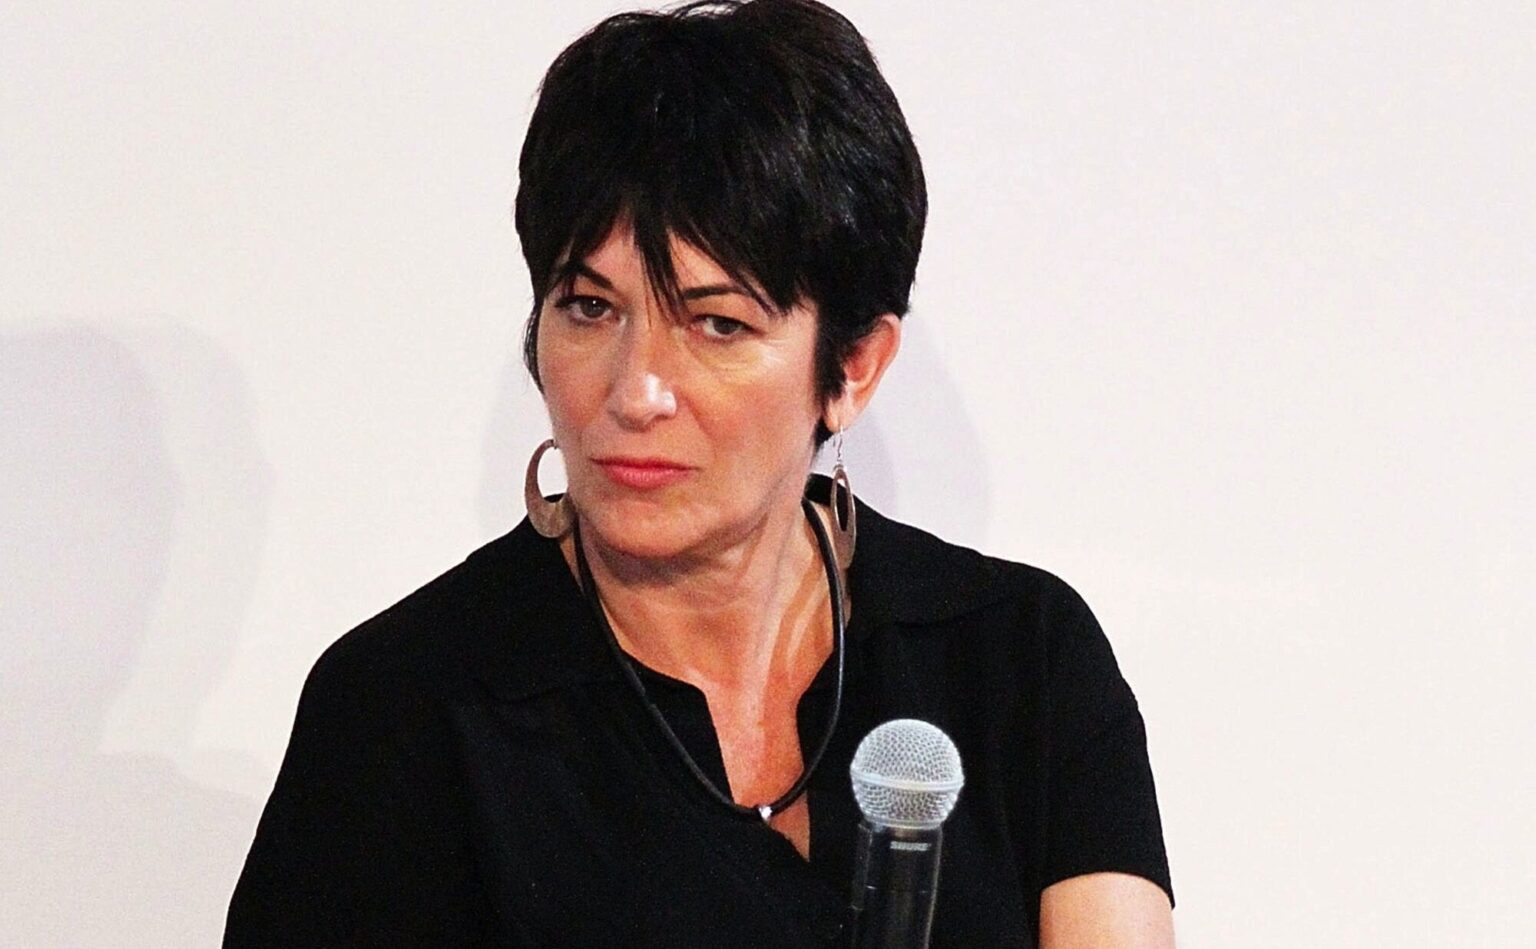 Ghislaine Maxwell has been accused of sexually assaulting multiple victims during her tenure with Jeffrey Epstein. Let's investigate.